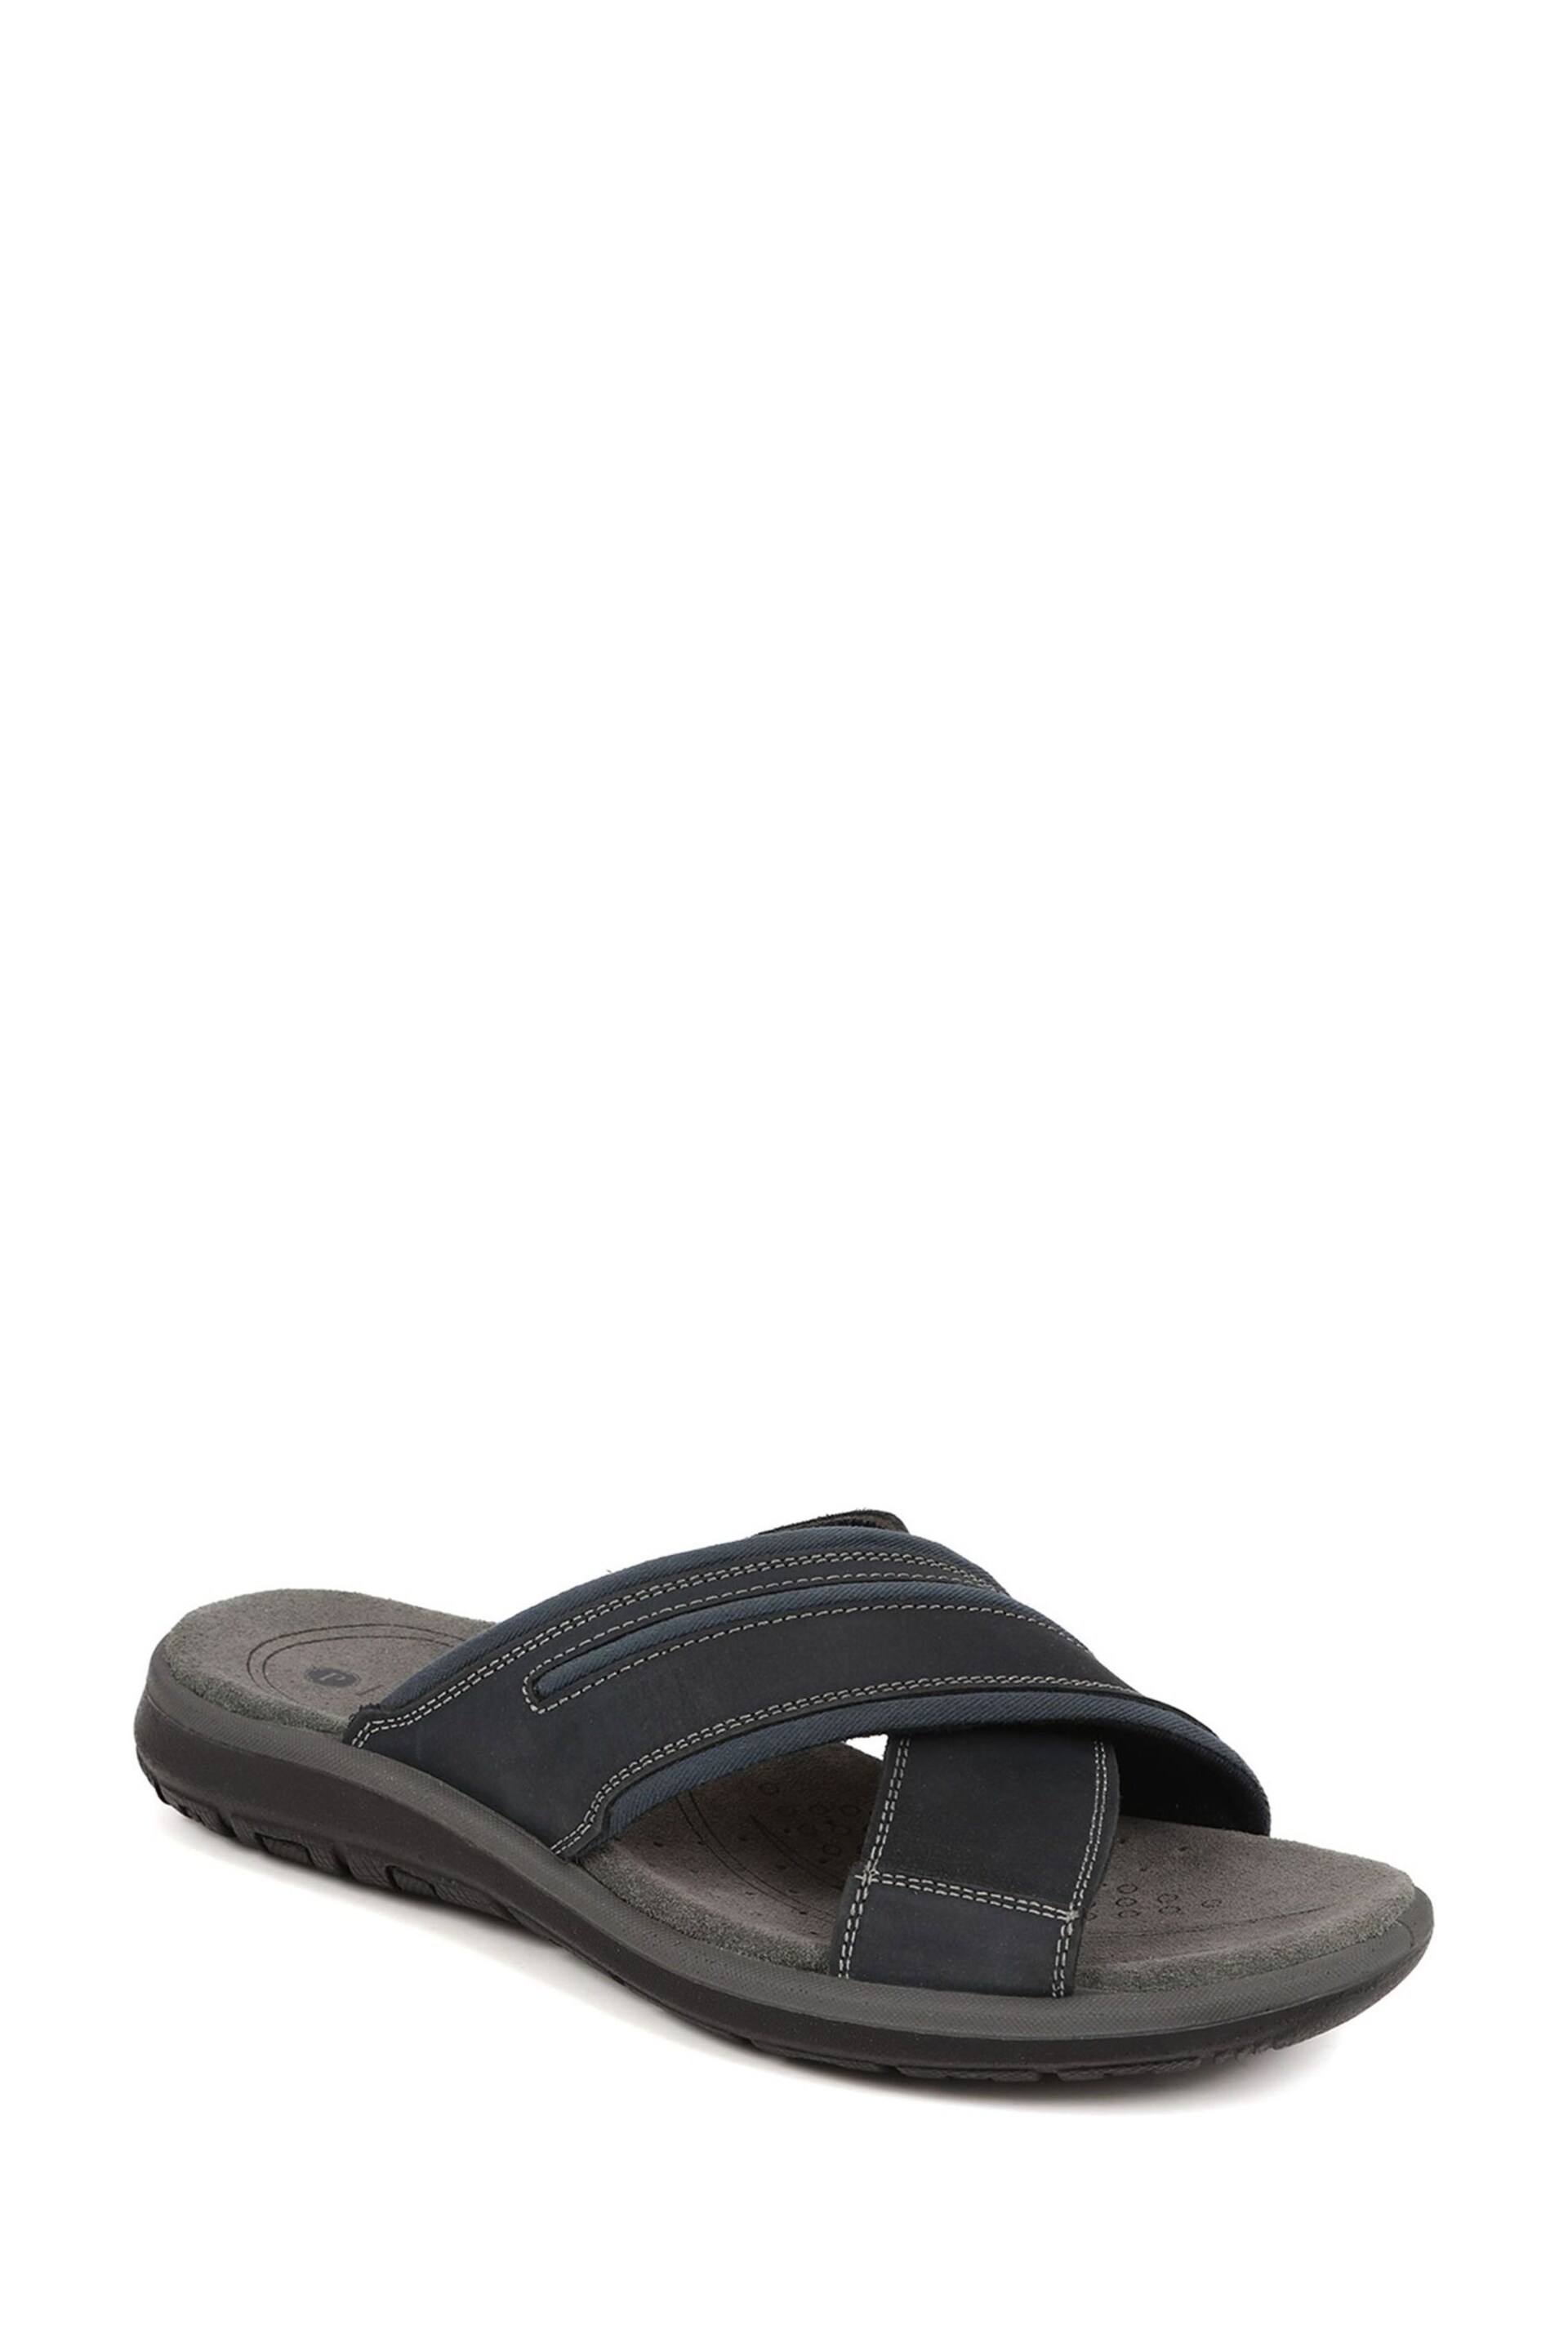 Pavers Blue Slip On Leather Mule Sandals - Image 2 of 5